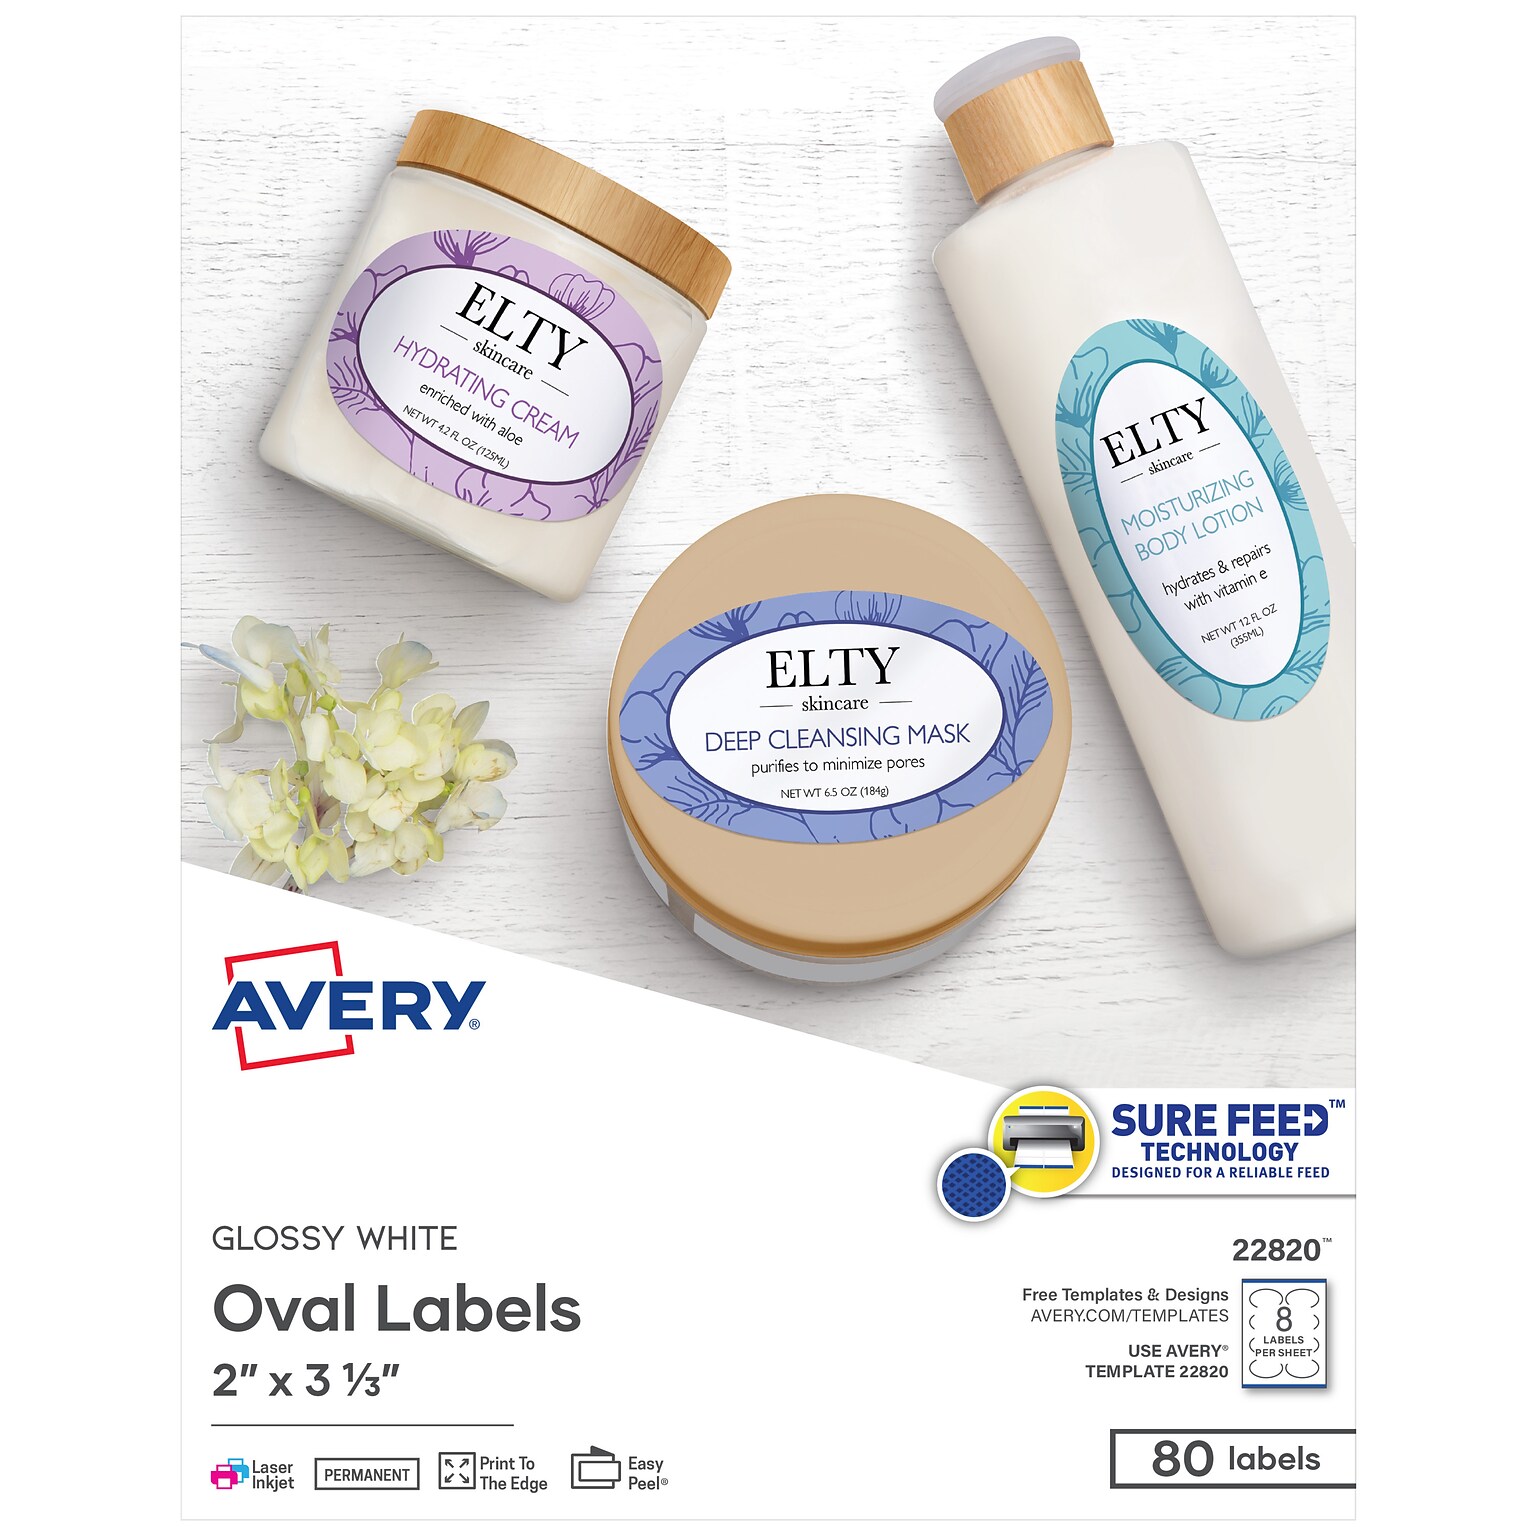 Avery Print-to-the-Edge Laser/Inkjet Oval Labels, 2 x 3 1/3, White, 8 Labels/Sheet, 10 Sheets/Pack, 80 Labels/Pack (22820)